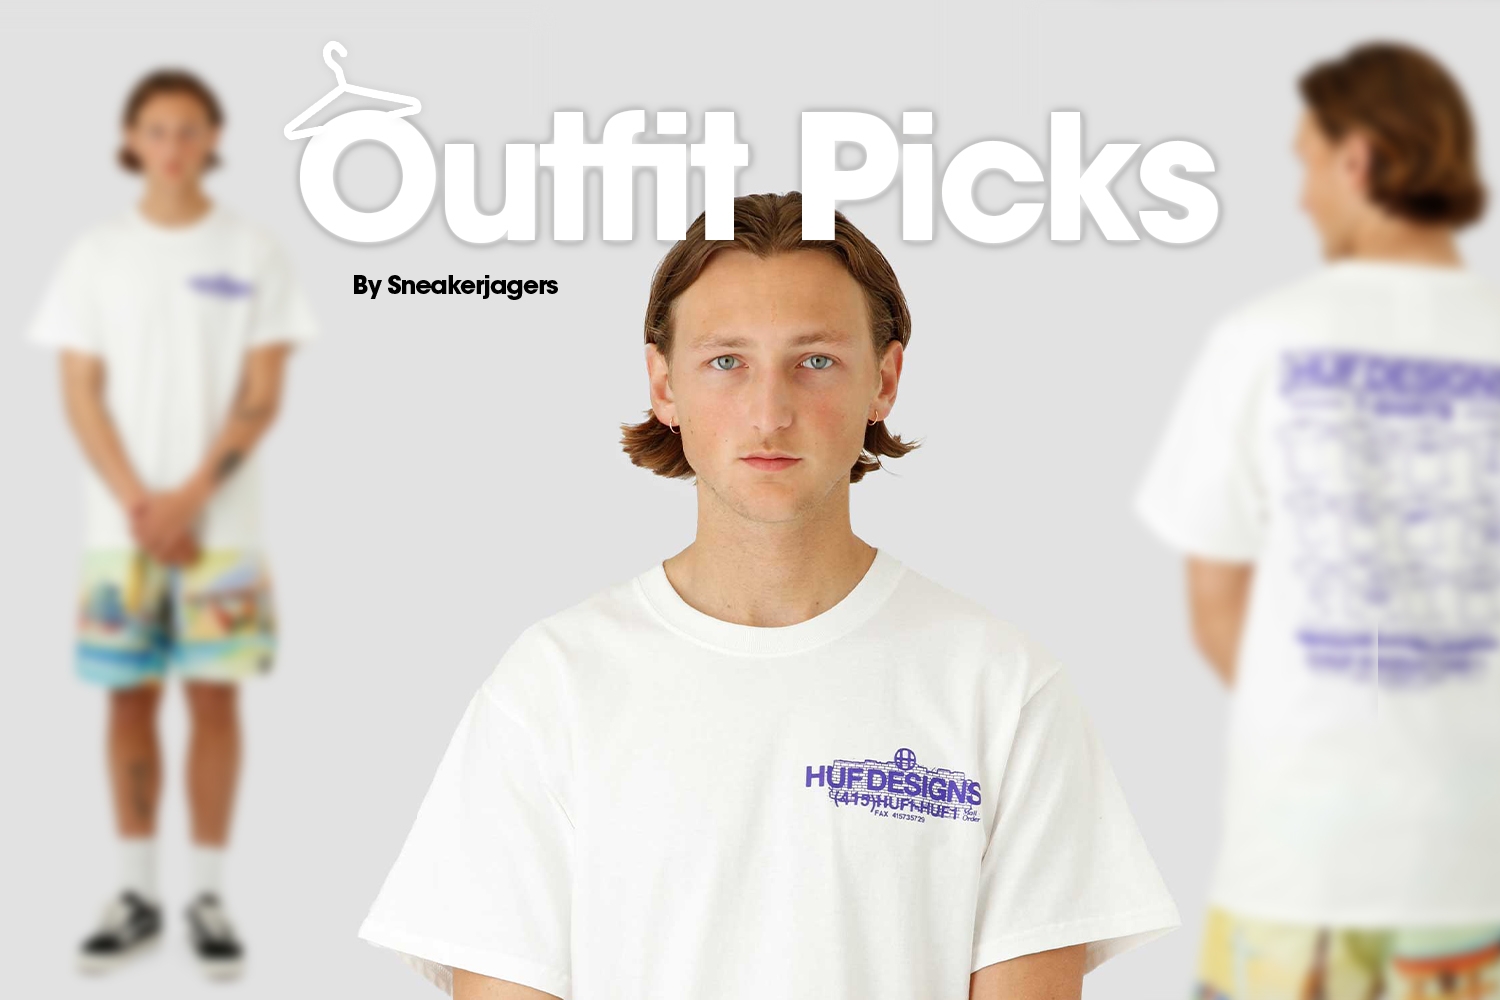 The Outfit Picks by FotomagazinShops of week 28